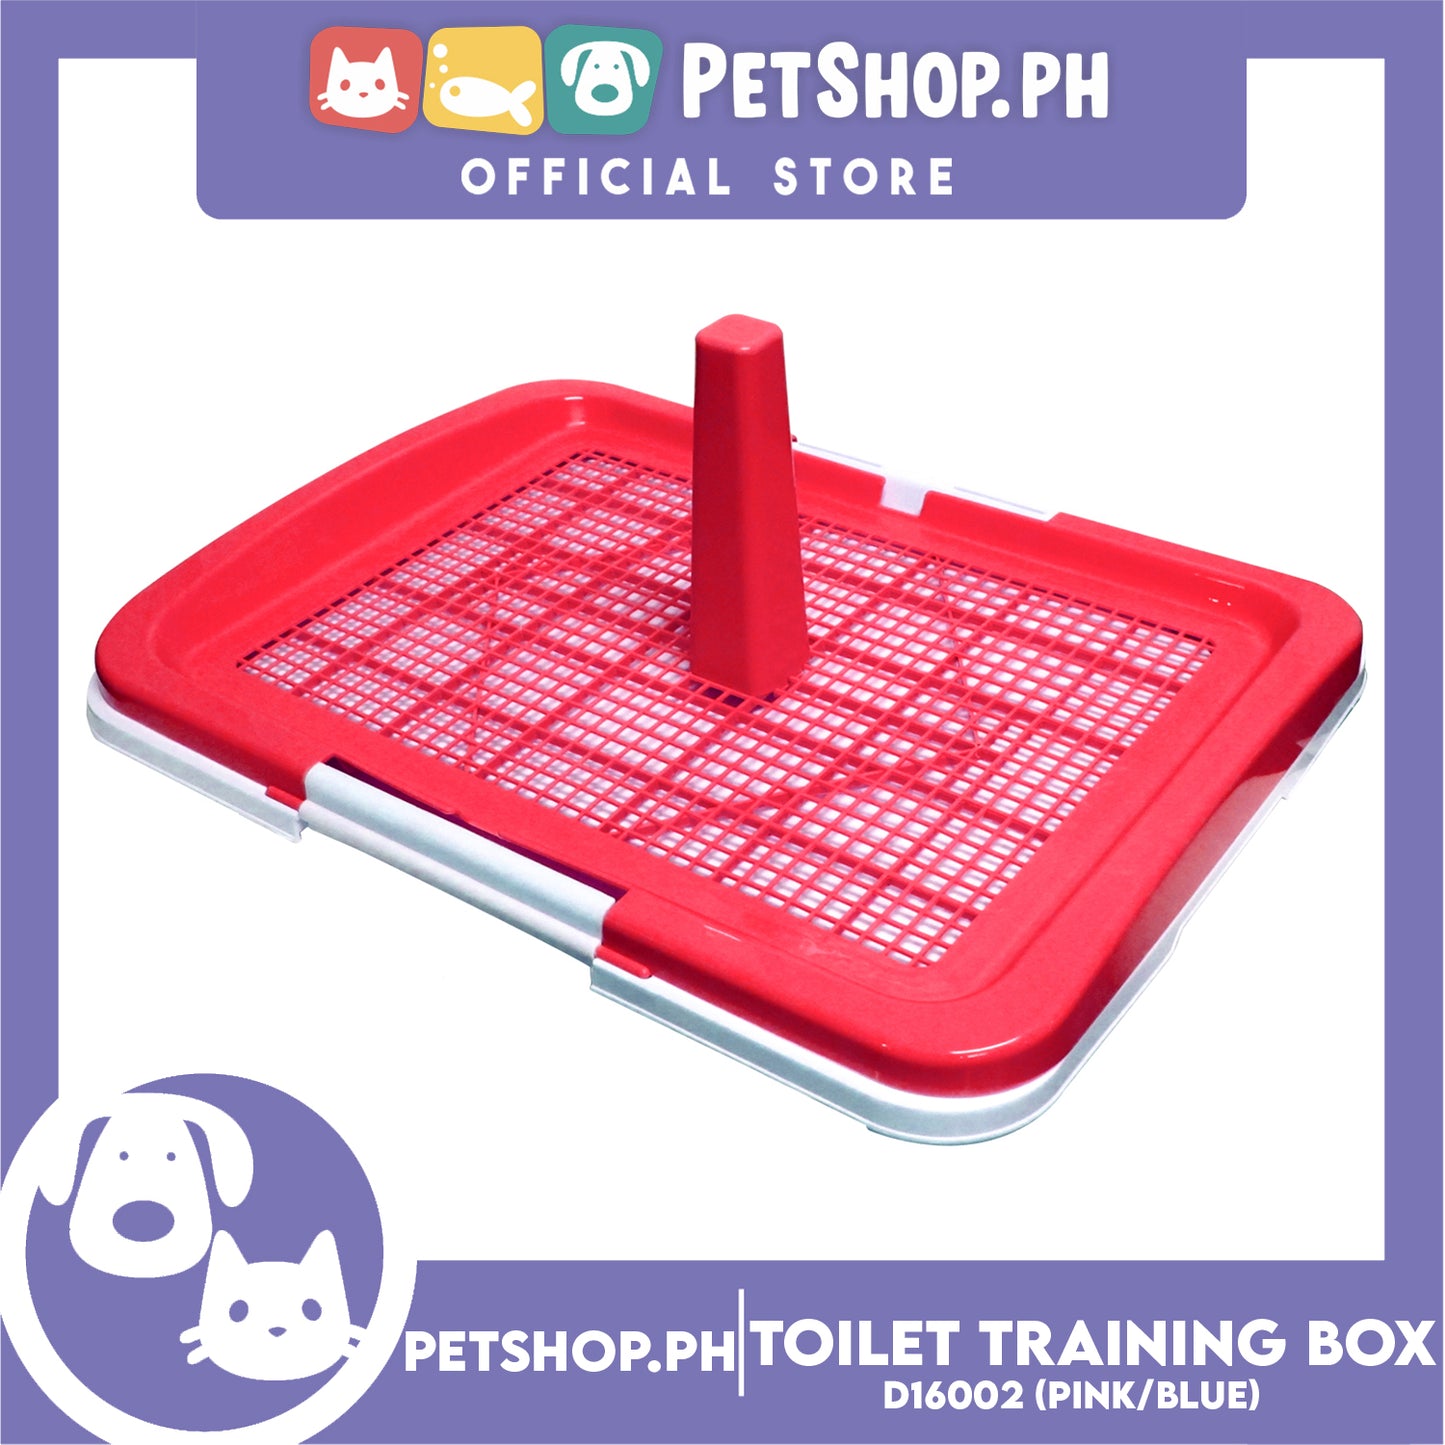 Pet Toilet Training Box 12x19'' D16002 (Pink) for Puppies and Kitties